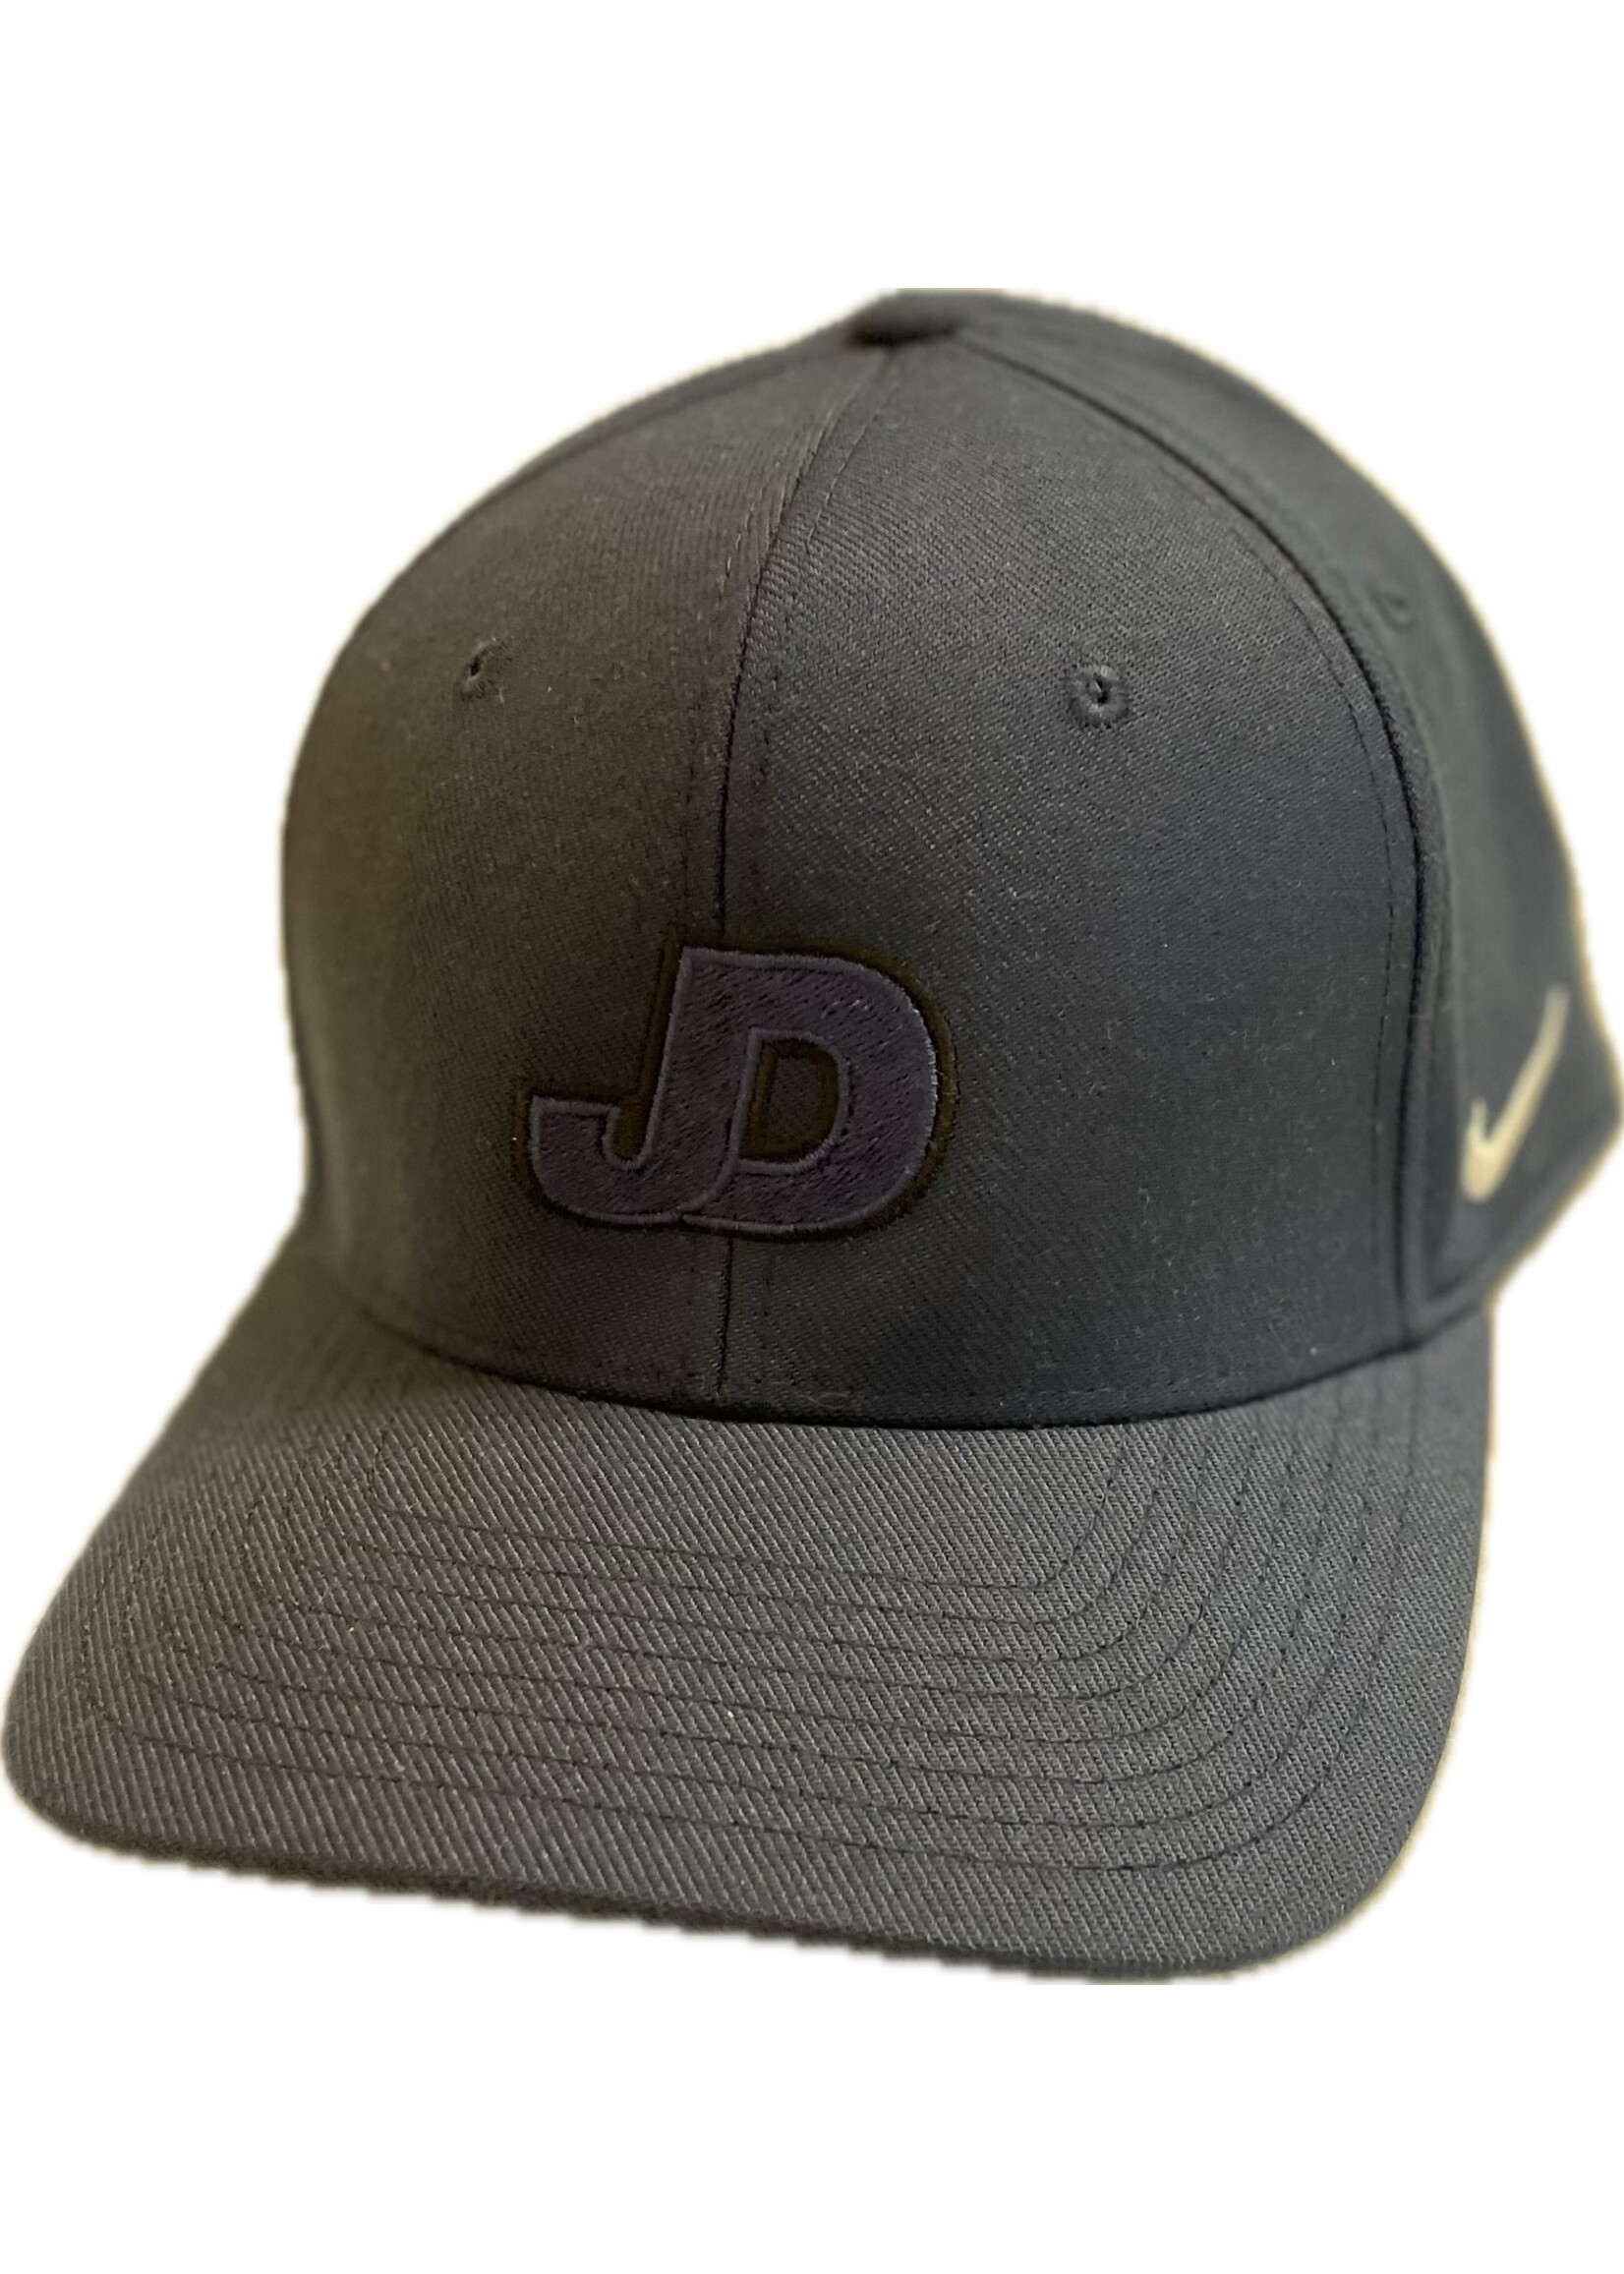 NON-UNIFORM Nike Cap - JD Fitted Hat